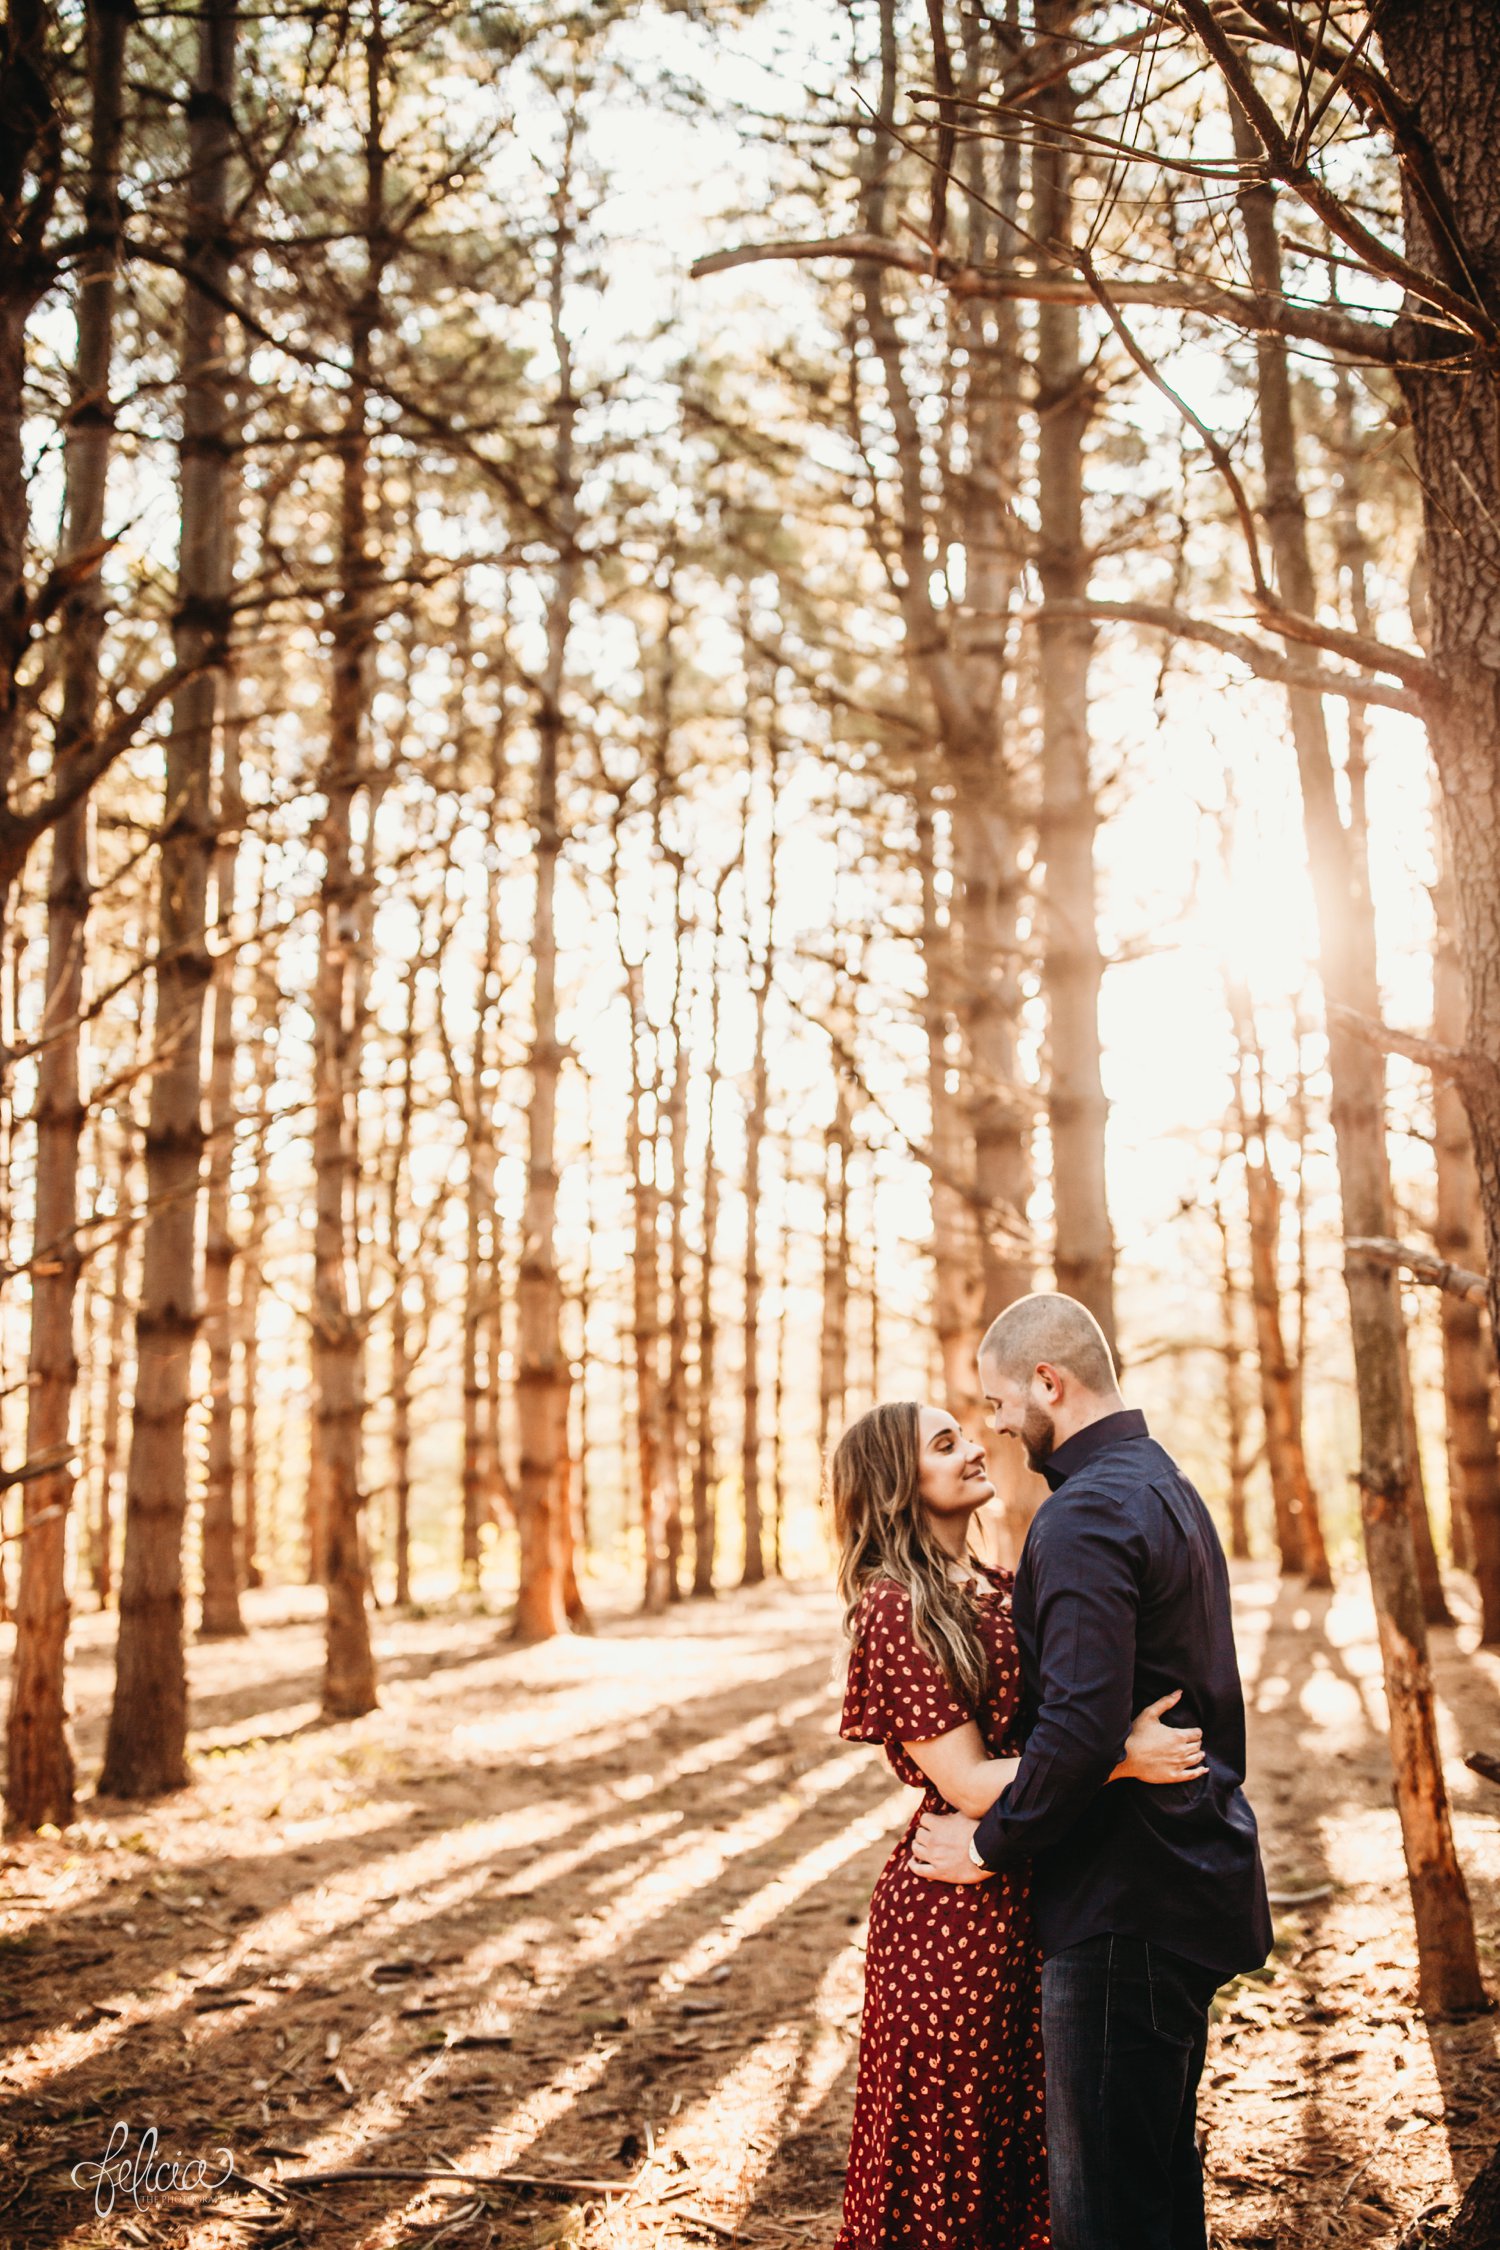 images by feliciathephotographer.com | The Forest | engagement photos | wedding photographer | engagement photographer | forest | sunrise | posed | posing | tall trees | floral dress | blue jeans | 